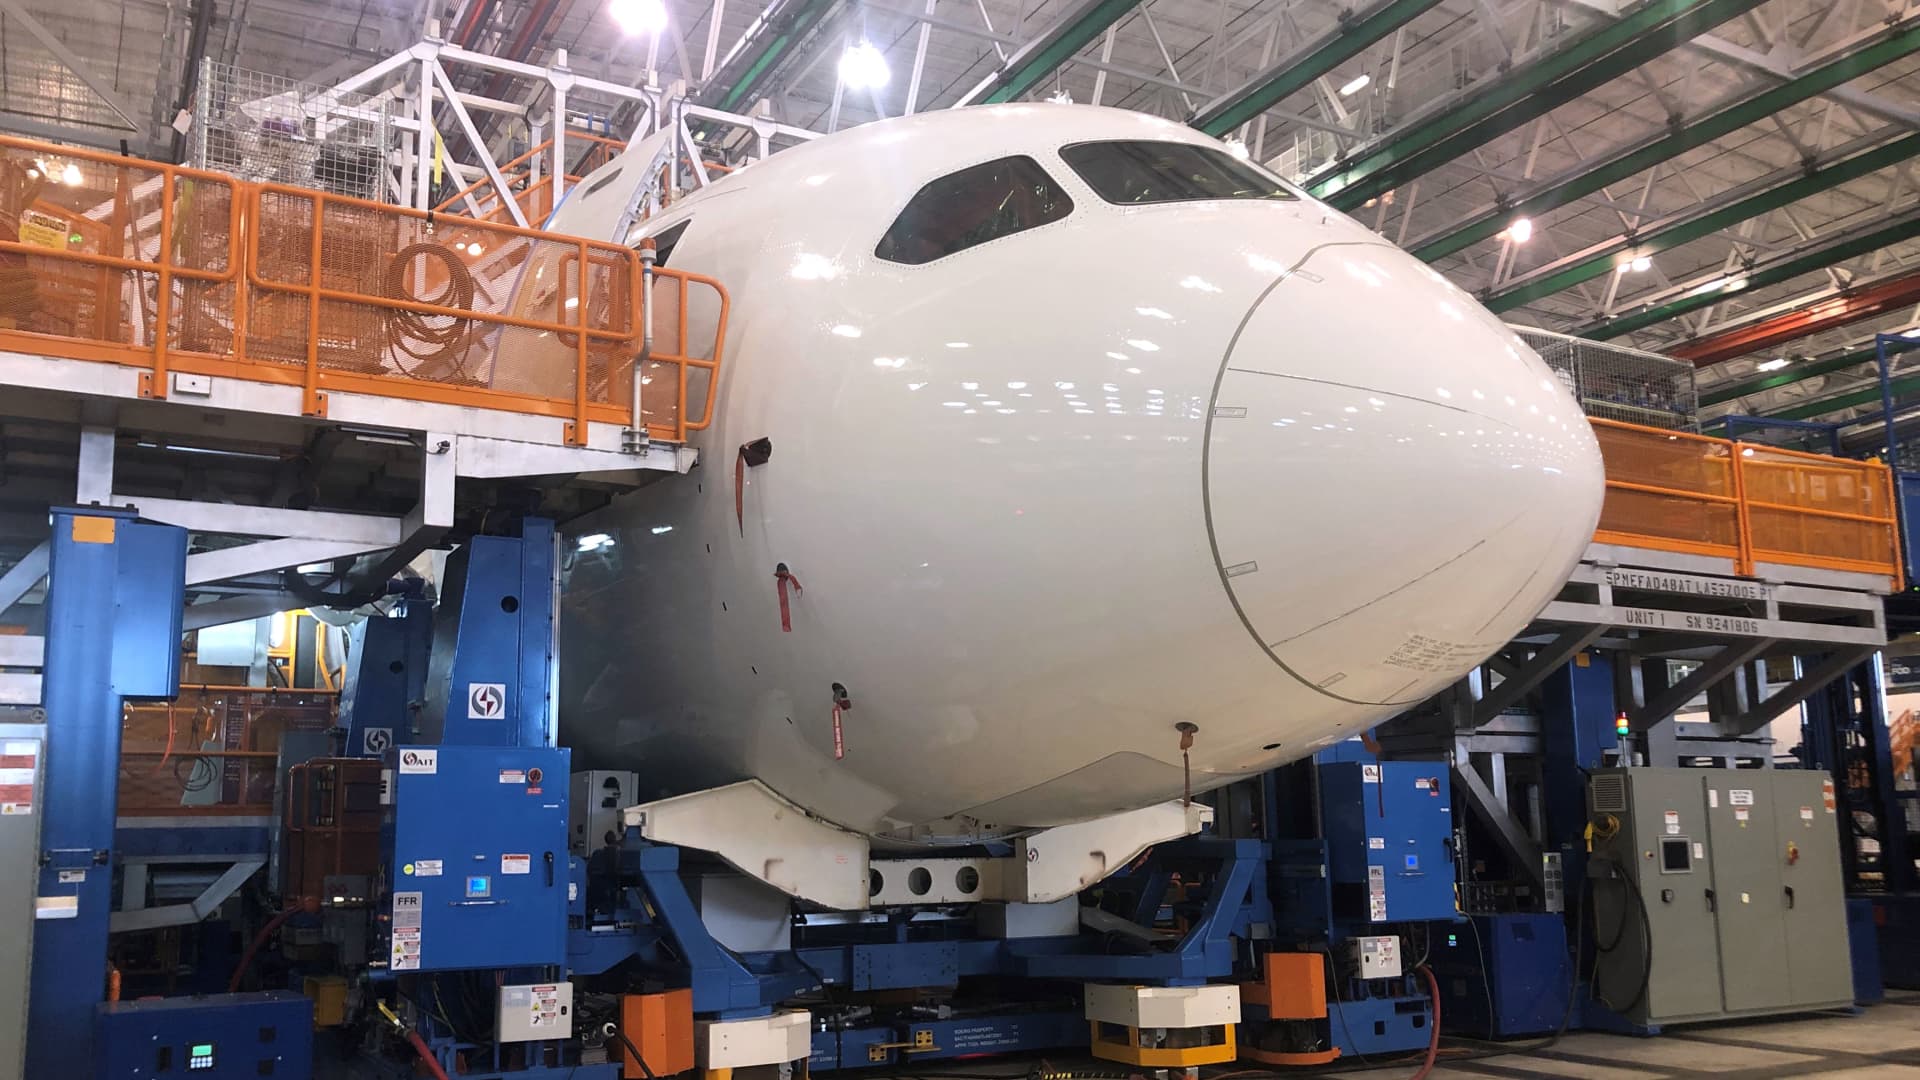 Boeing expects slower production increase of 787 Dreamliner because of parts shortages